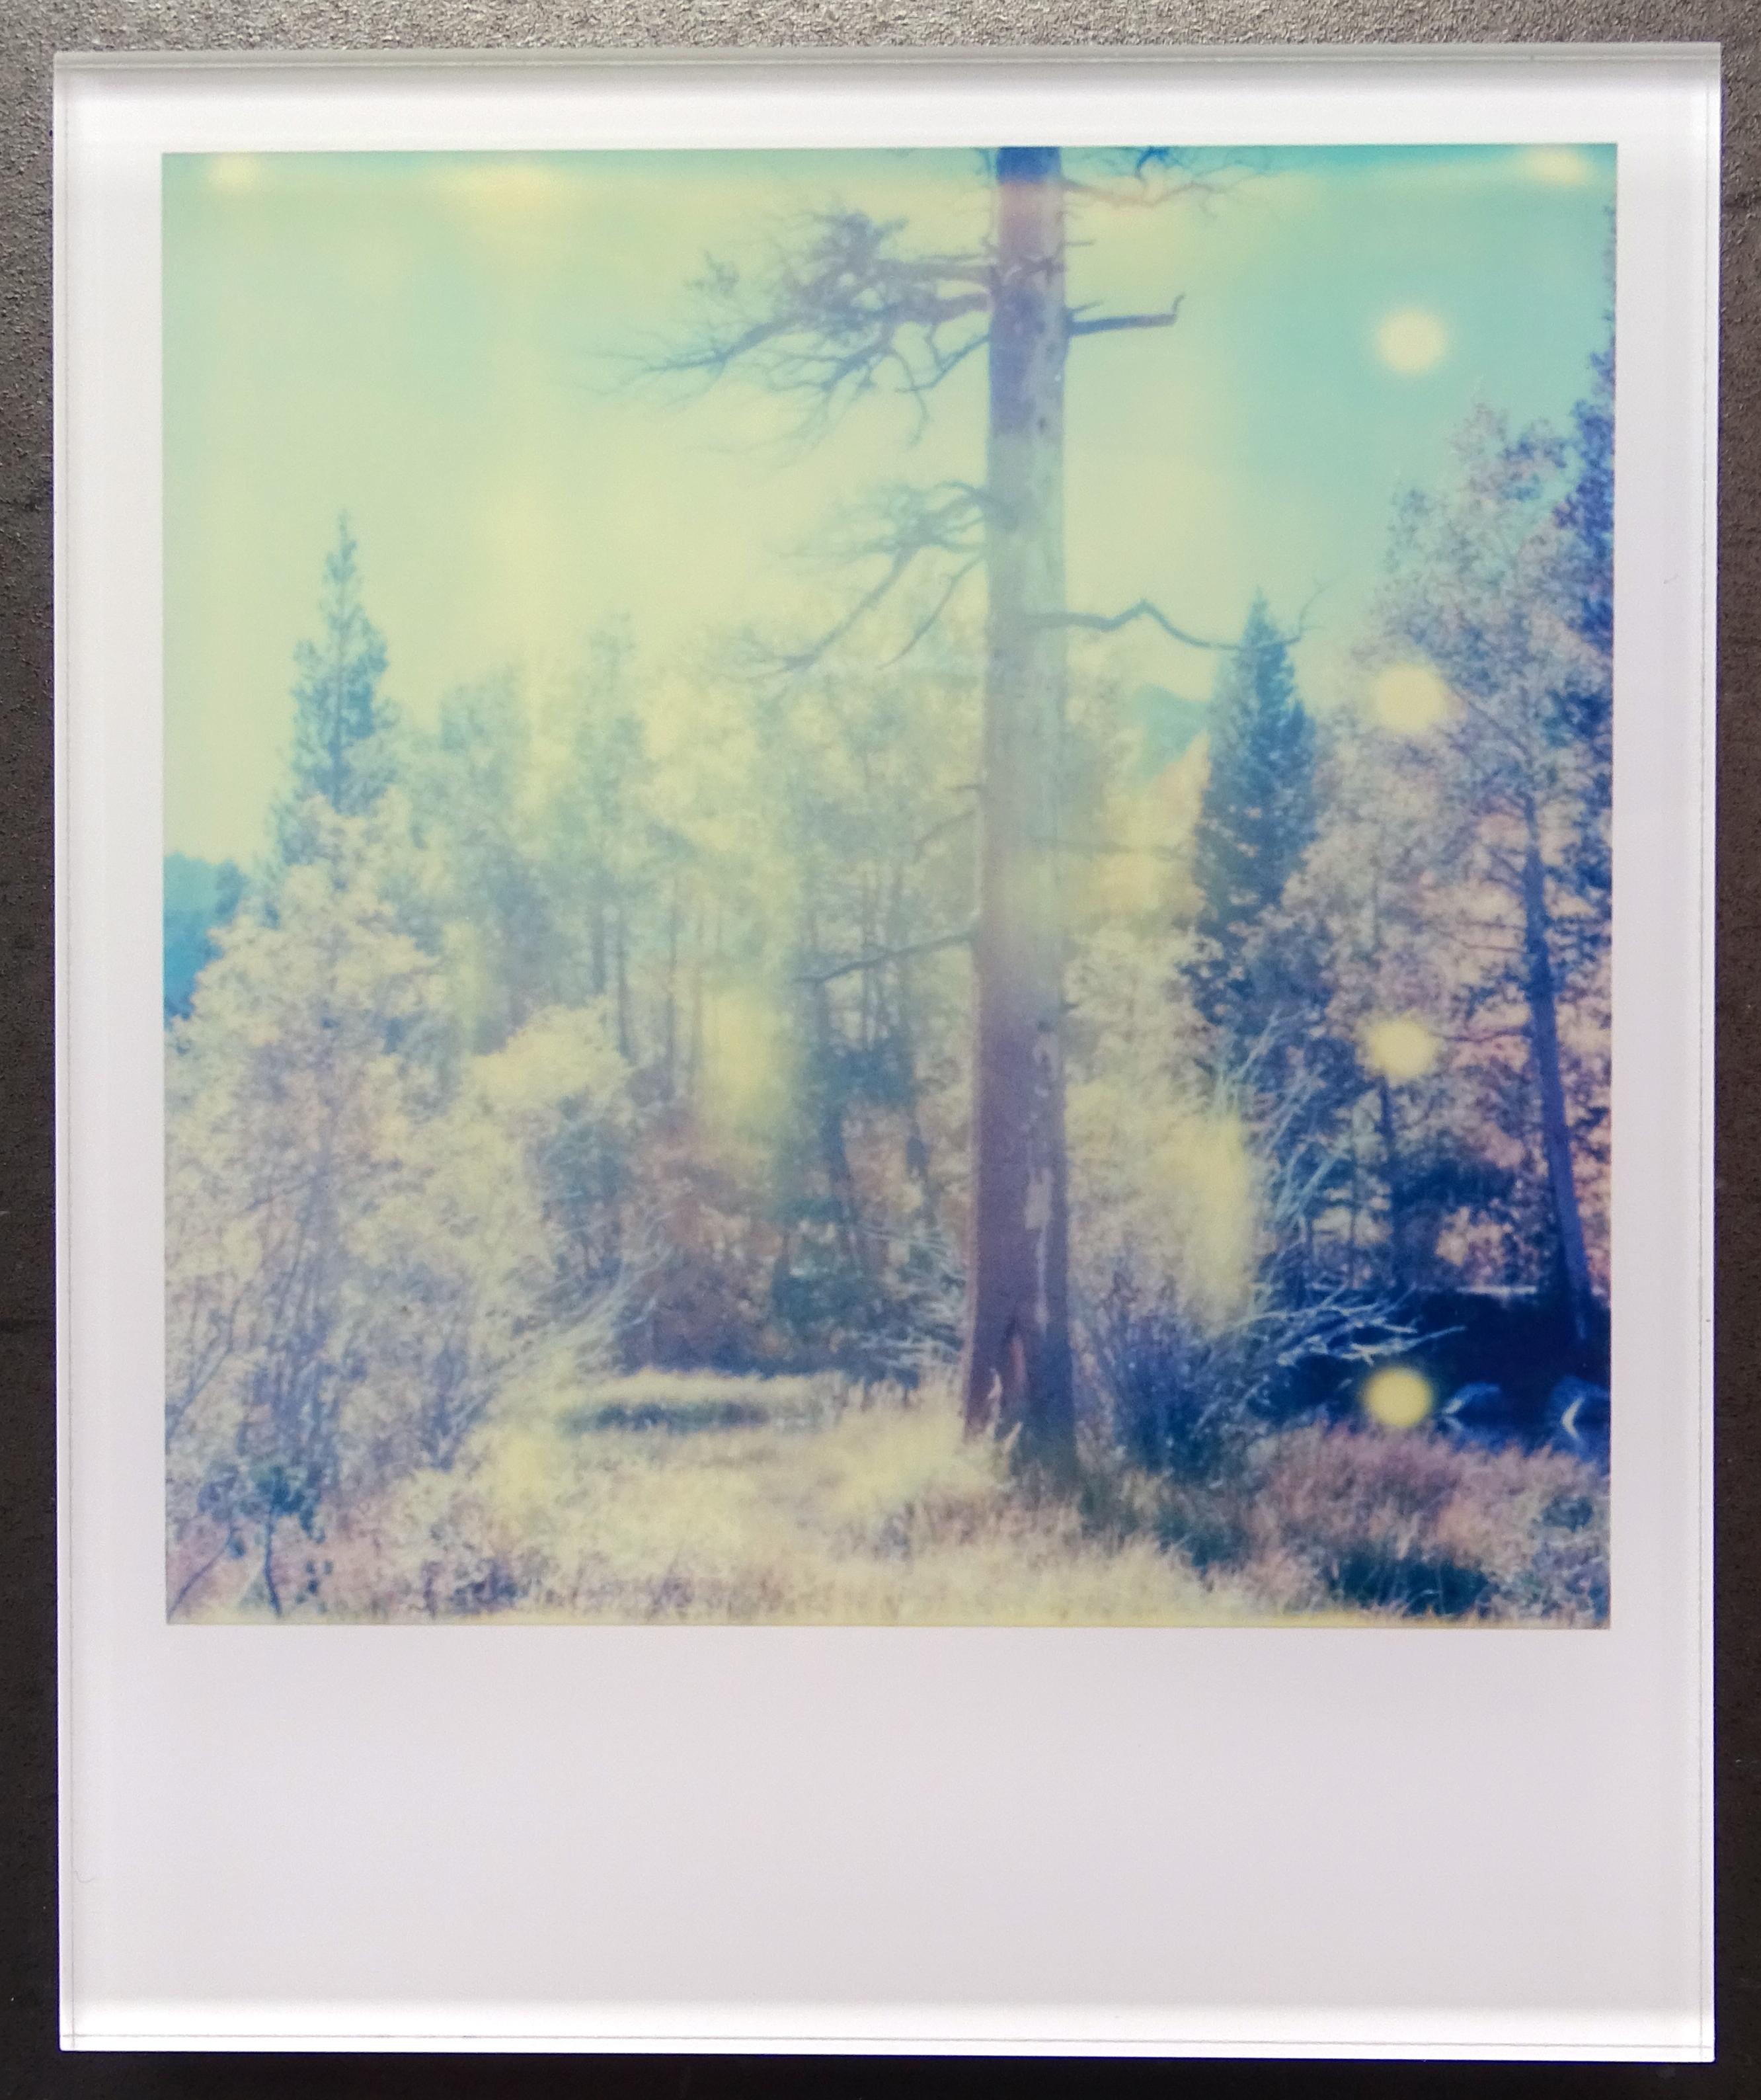 Stefanie Schneider's Minis
In the Range of Light (Wastelands), 2003

Signed and signature brand on verso.
Lambda digital Color Photographs based on the Polaroid.
Sandwiched in between Plexiglass (thickness 0.7cm)

Polaroid sized open Editions